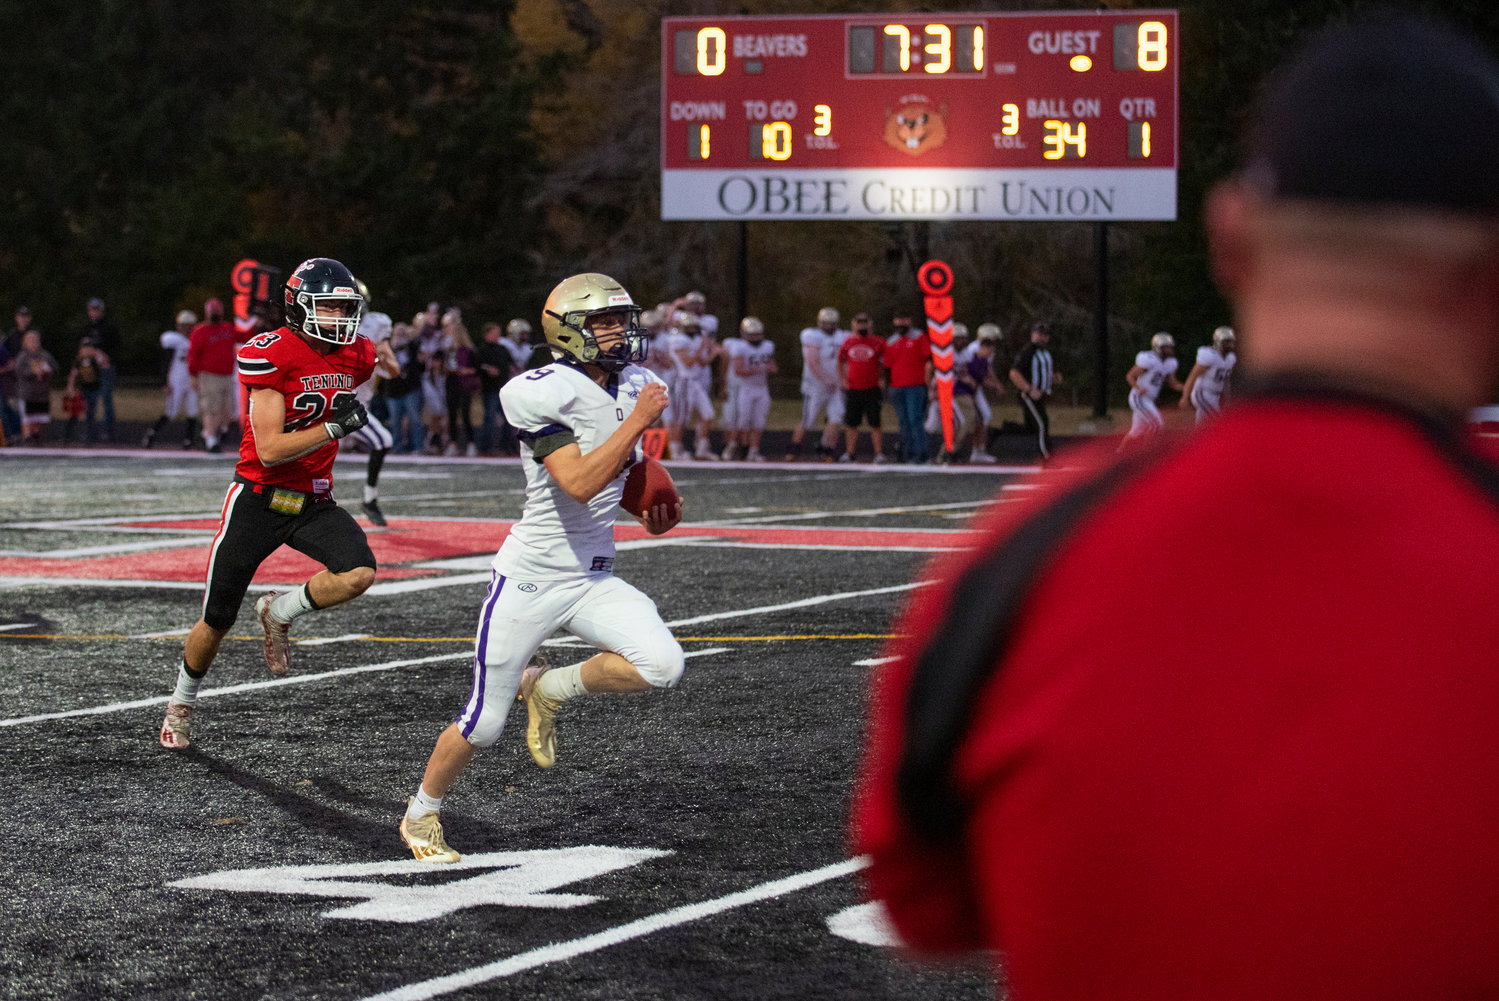 Onalaska's Kolby Mozingo (9) takes off for a 63-yard run before being brought down by Tenino's Dylan Spicer (23) on Friday.